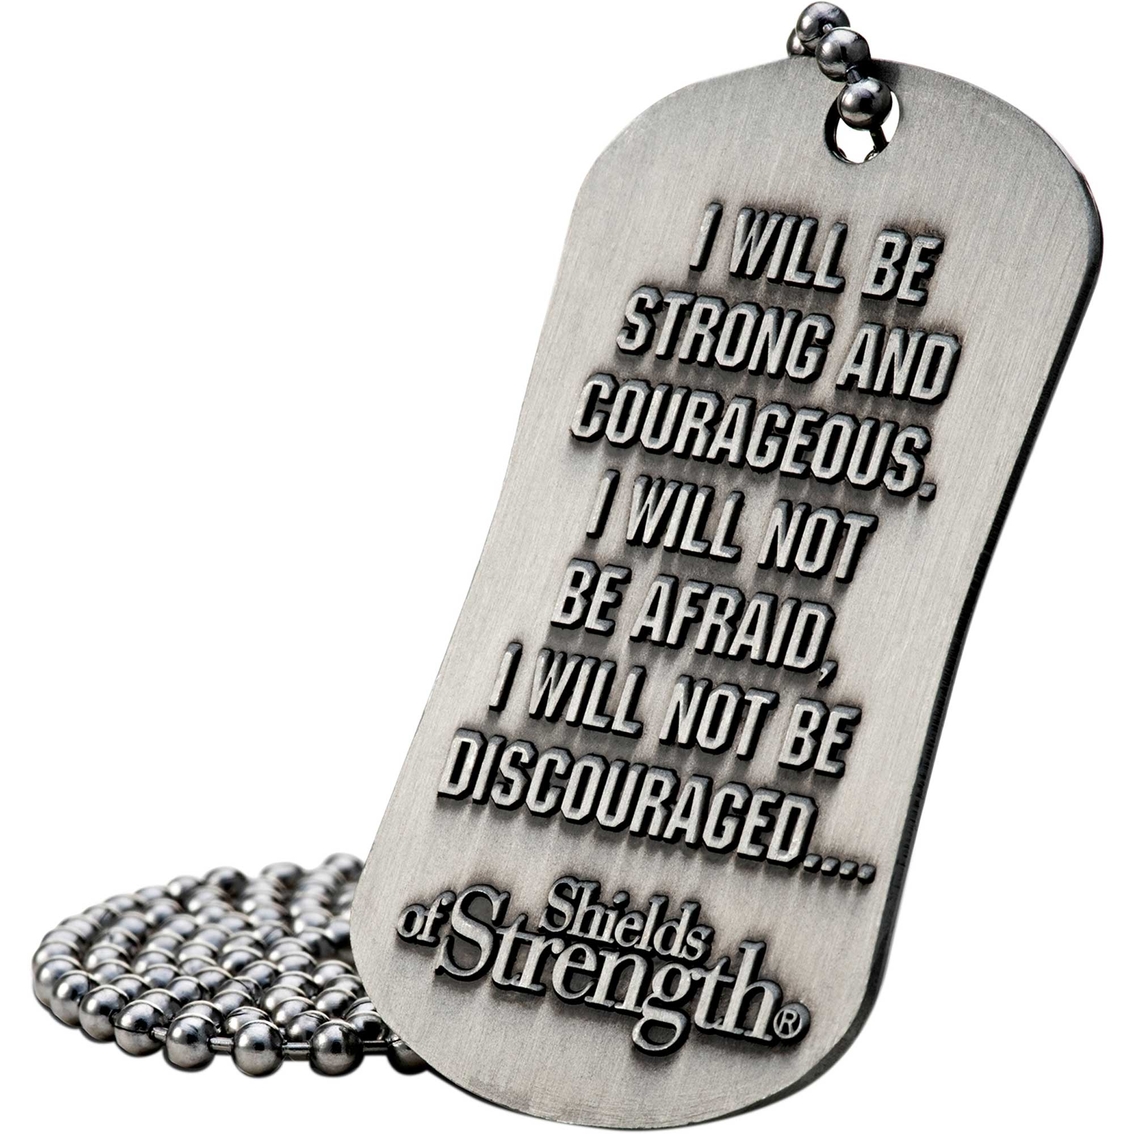 Shields of Strength Army Antique Finish Dog Tag Necklace, Joshua 1:9 - Image 3 of 5